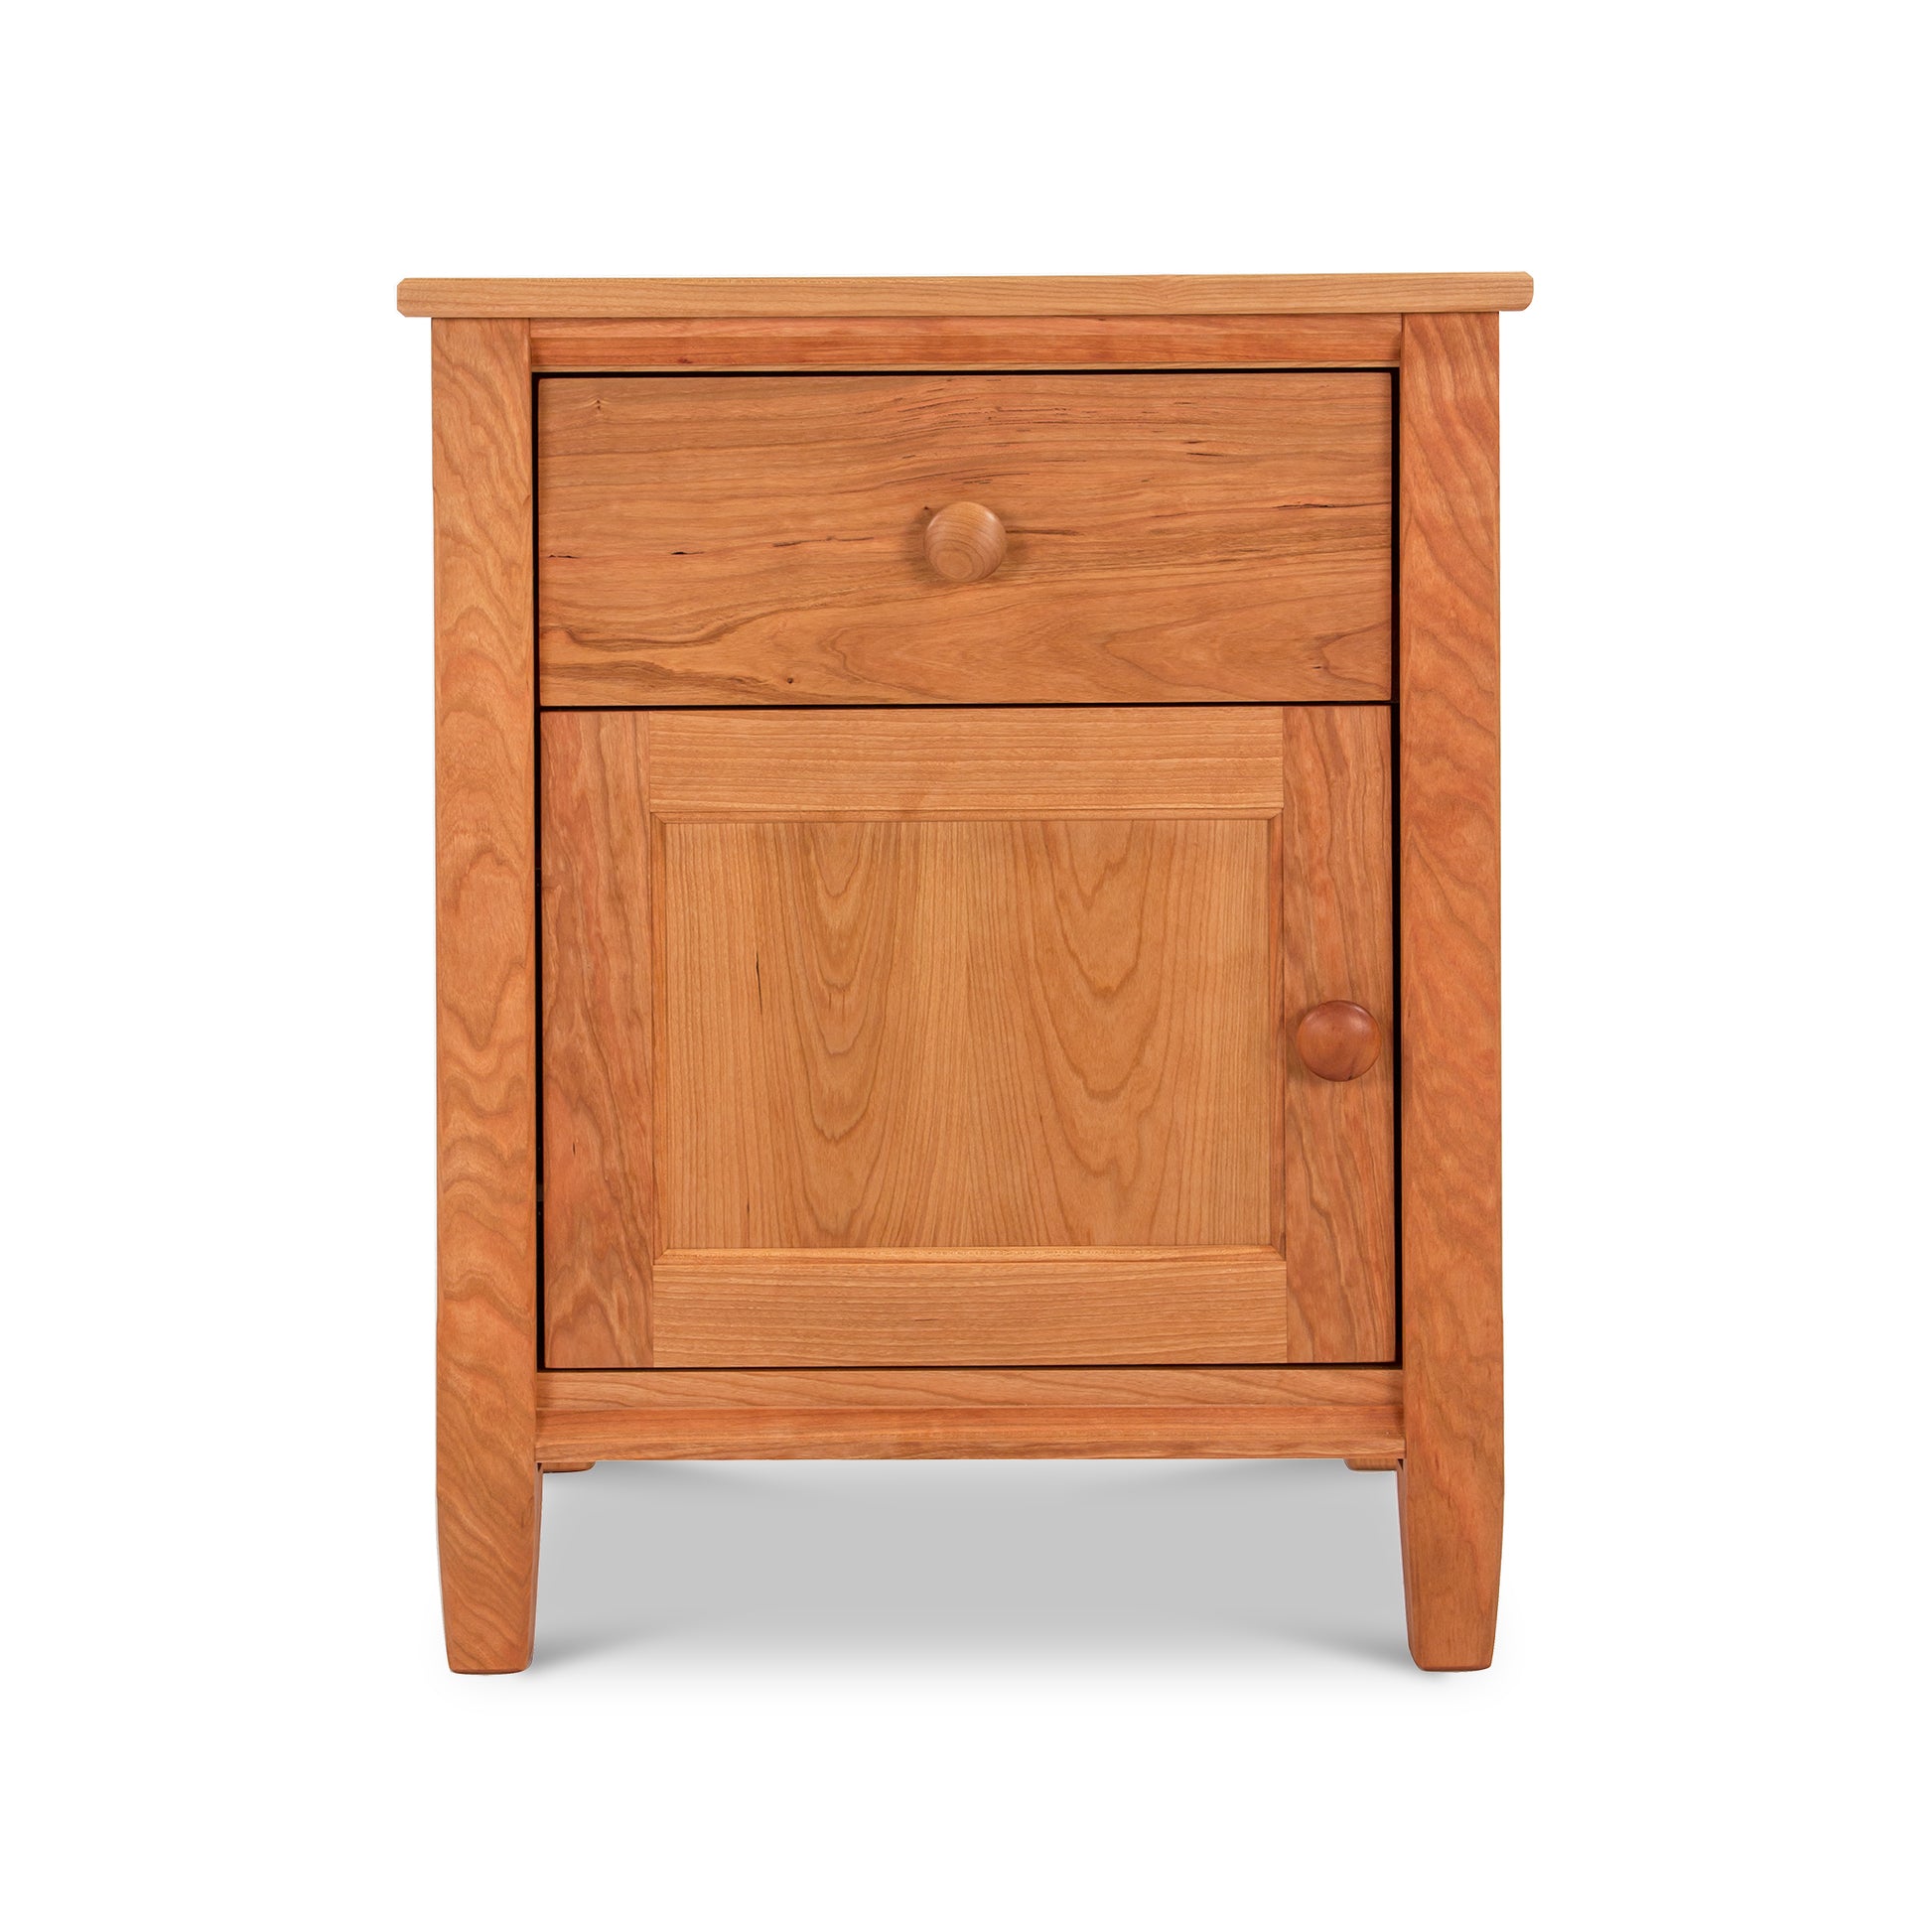 A Vermont Shaker 1-Drawer Nightstand with Door from Maple Corner Woodworks, featuring a natural cherry wood finish, one drawer, and a cabinet door, set against a plain white background.